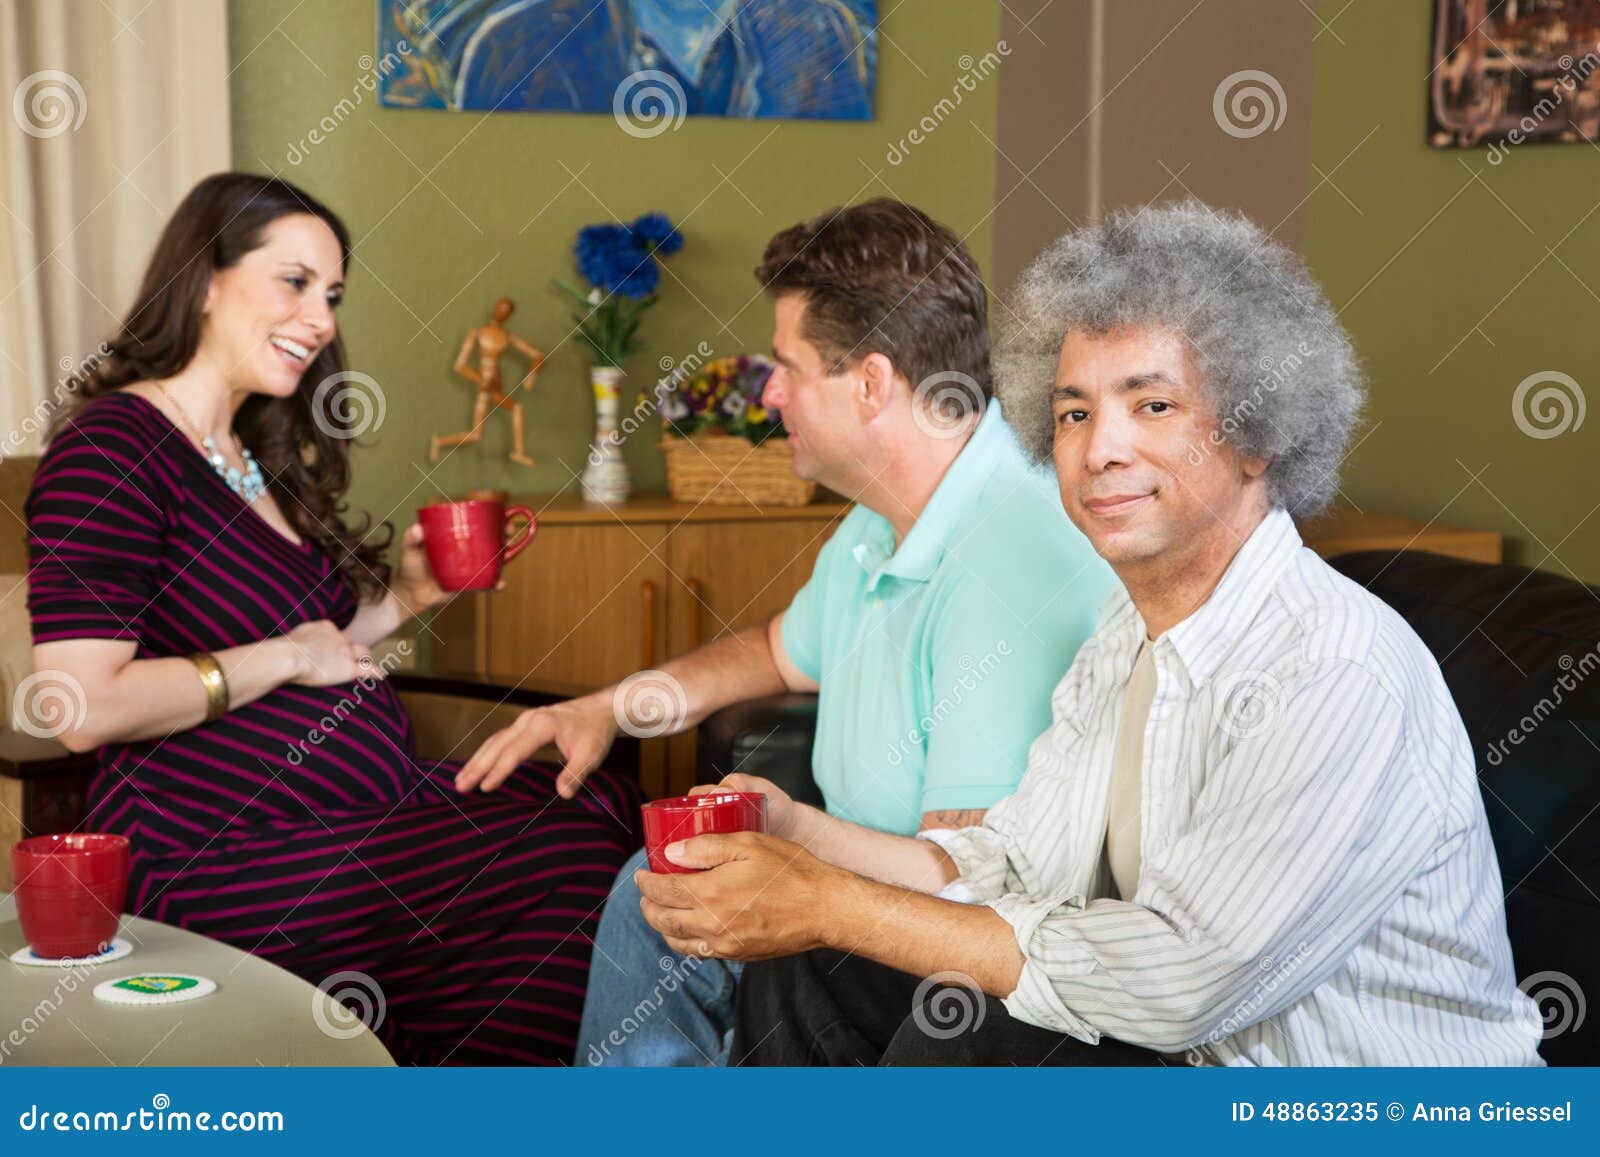 Surrogate Mother with Two Same Sex Parents Stock Image